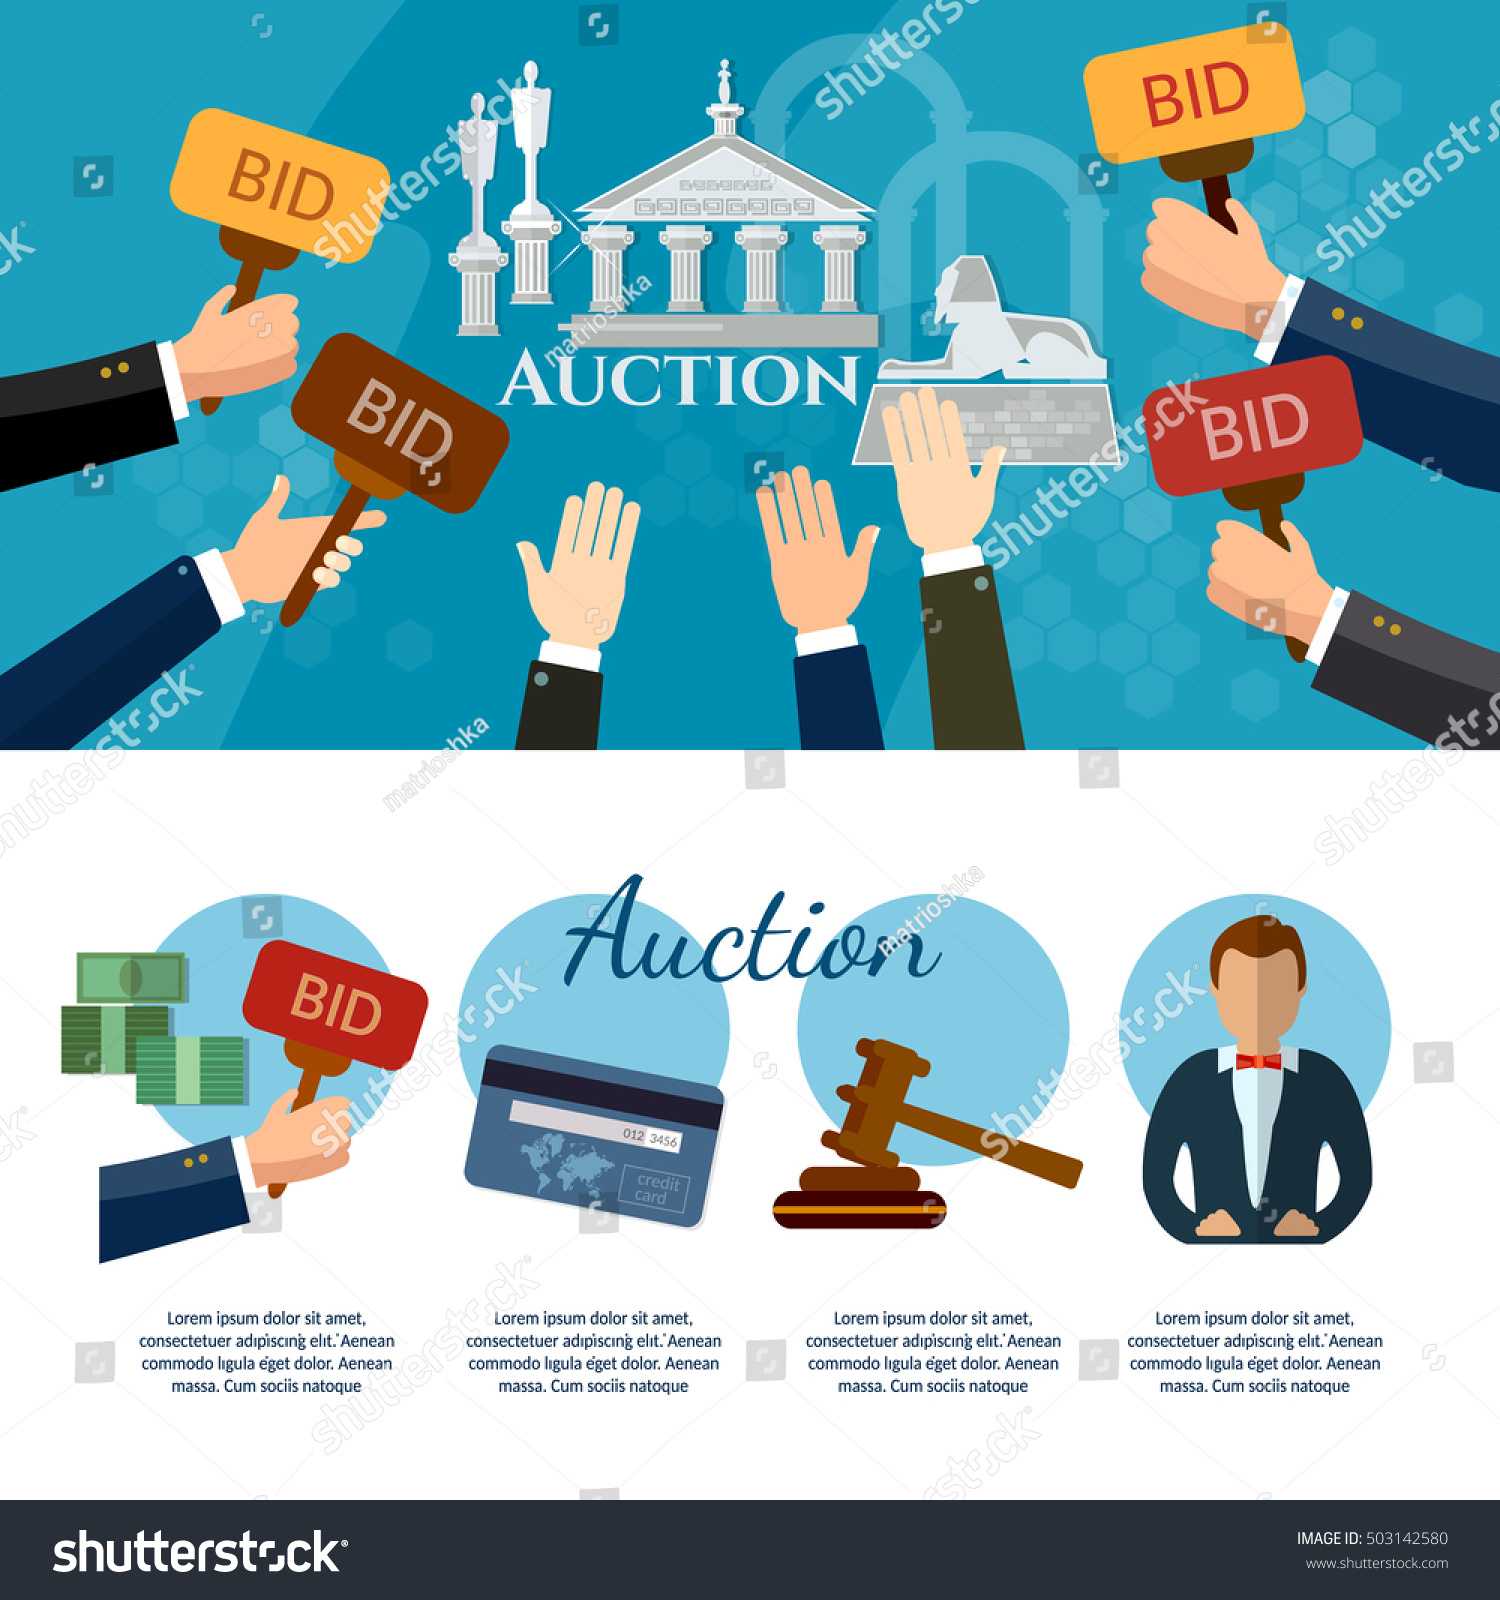 Auction Bidding Banners Auction Selling Antiques Stock With Auction Bid Cards Template